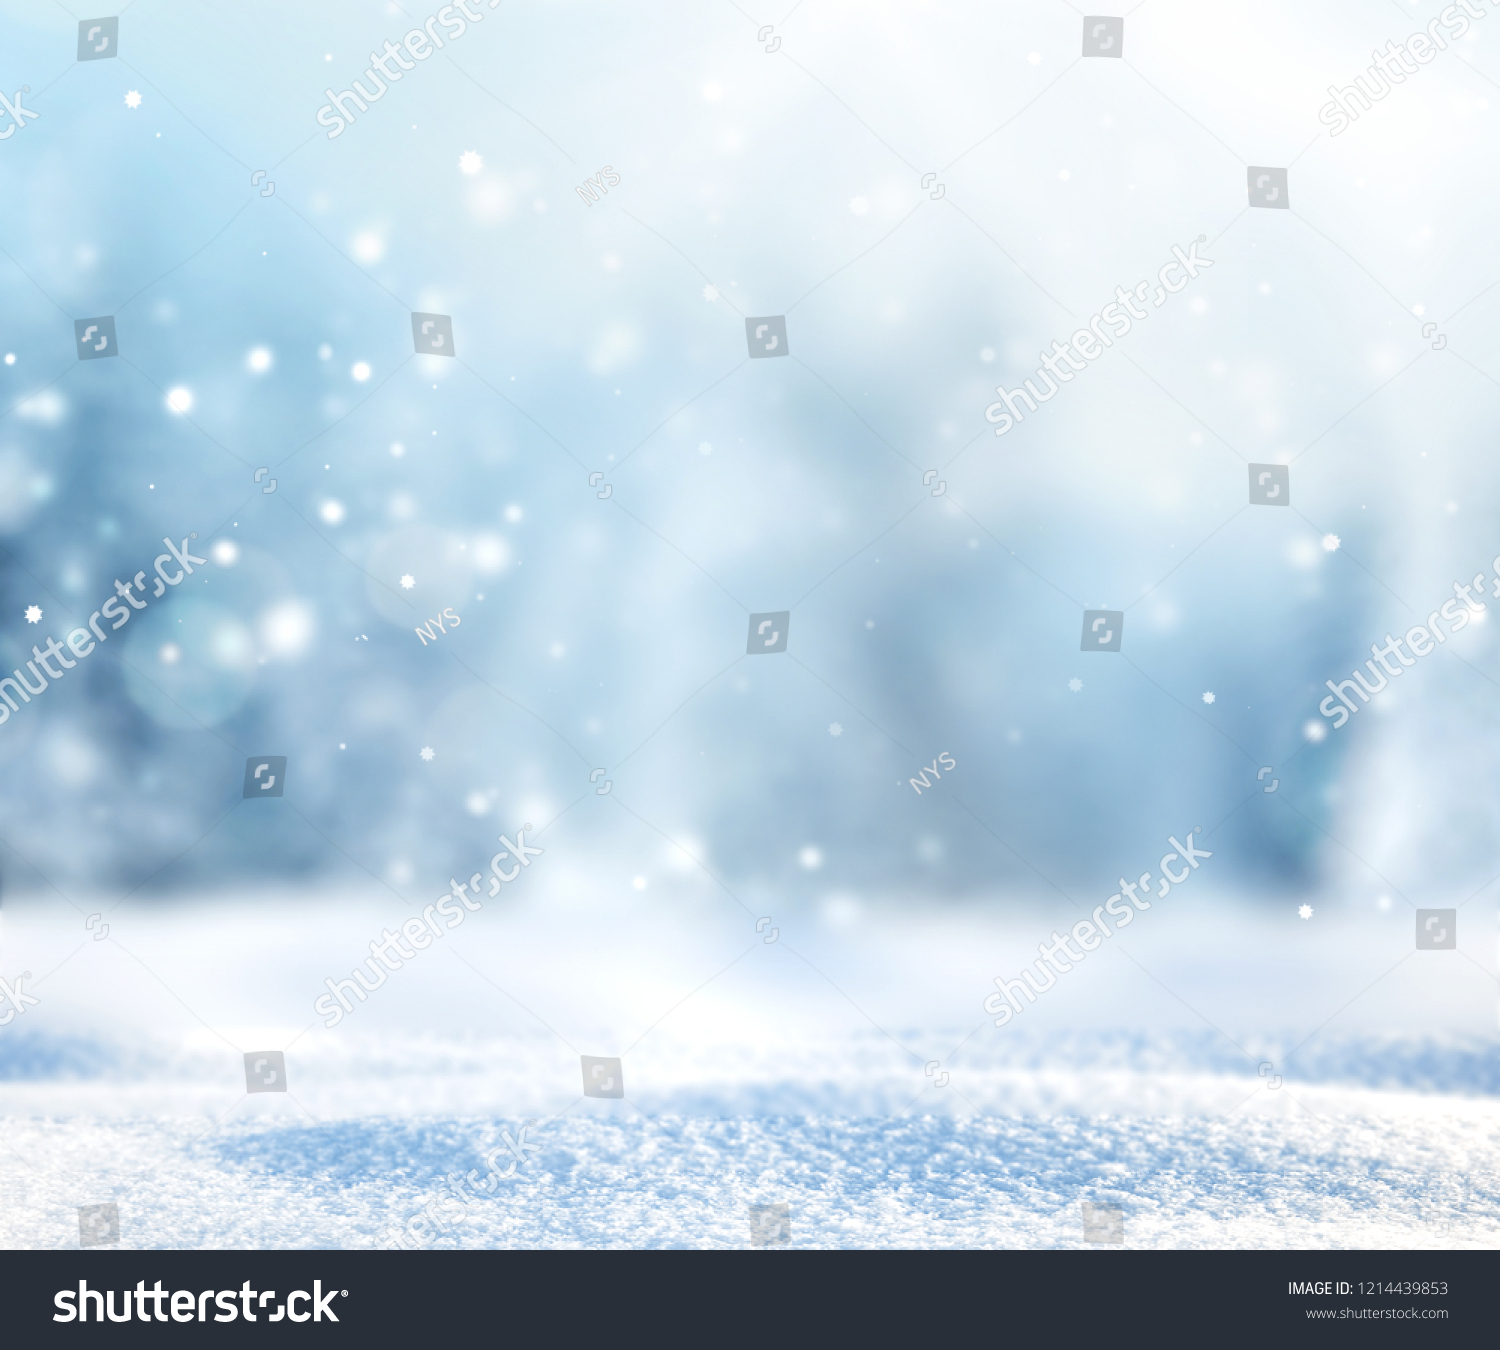 Snowy winter landscape,fir pine forest blurred background.Christmas backdrop. #1214439853